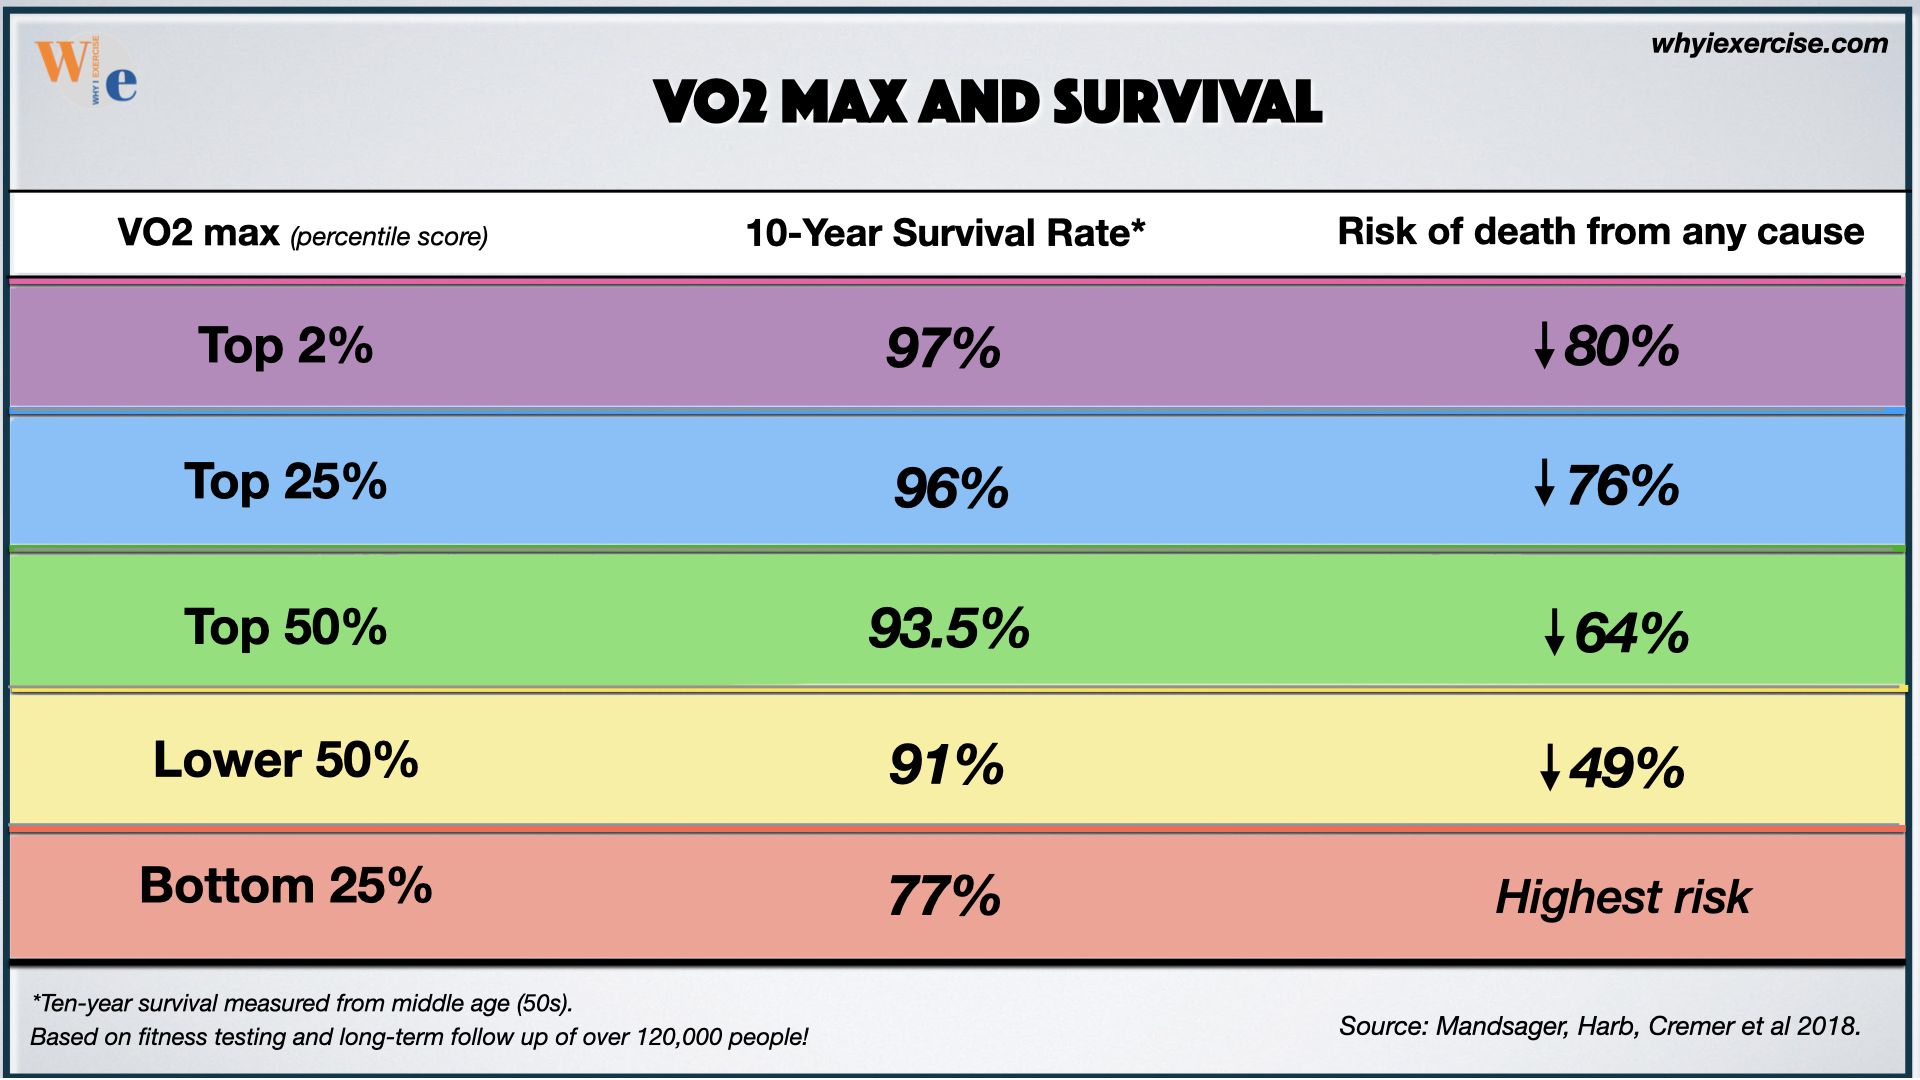 Cardio fitness (VO2 max) and 10-year survival rate